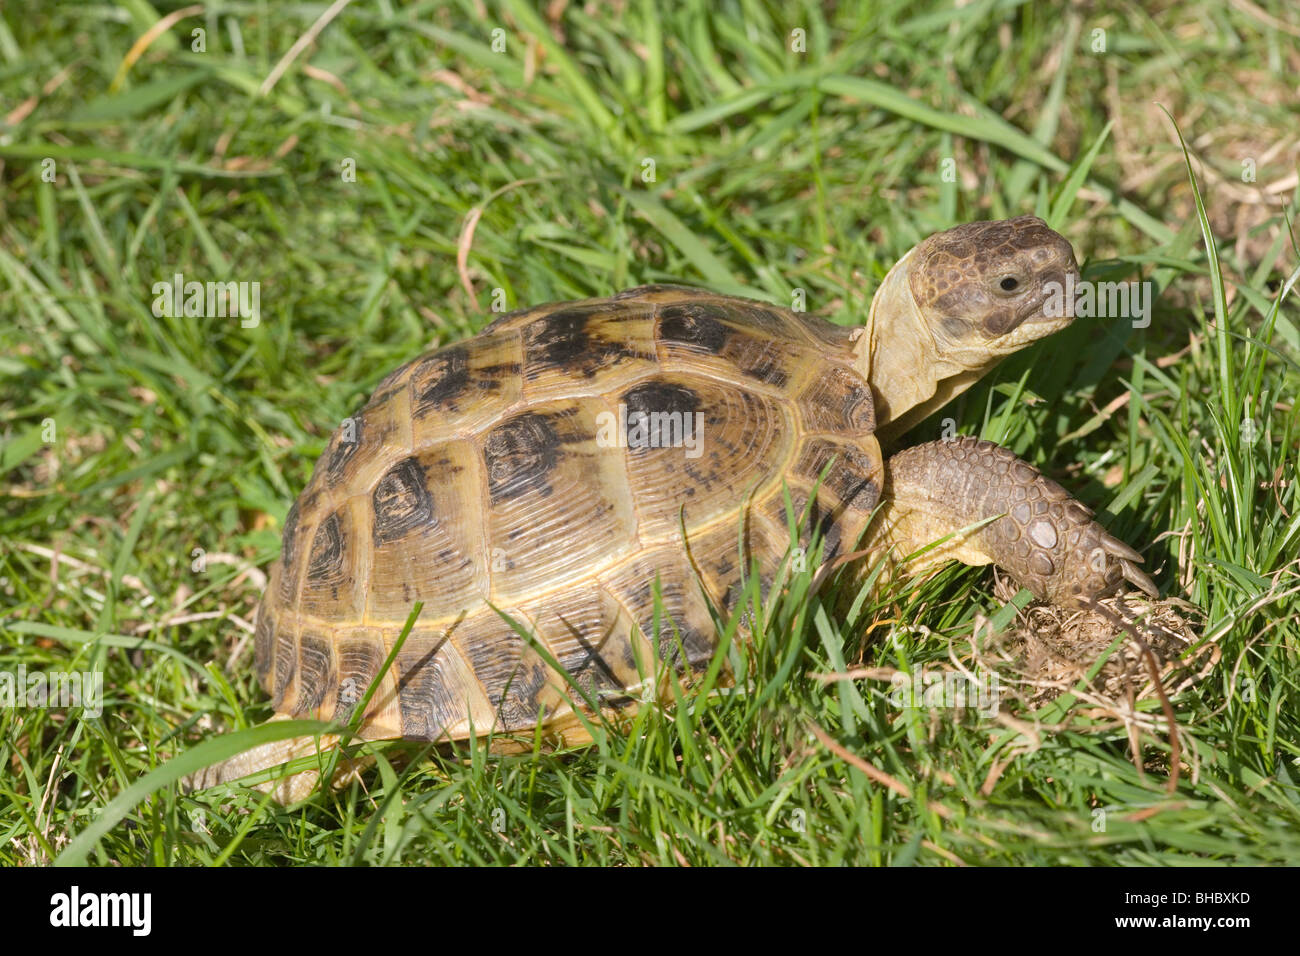 Horsefield's, Four-toed, or Russian Tortoise (Testudo horsefieldi). Native to central Asia, Russia to Pakistan. Stock Photo